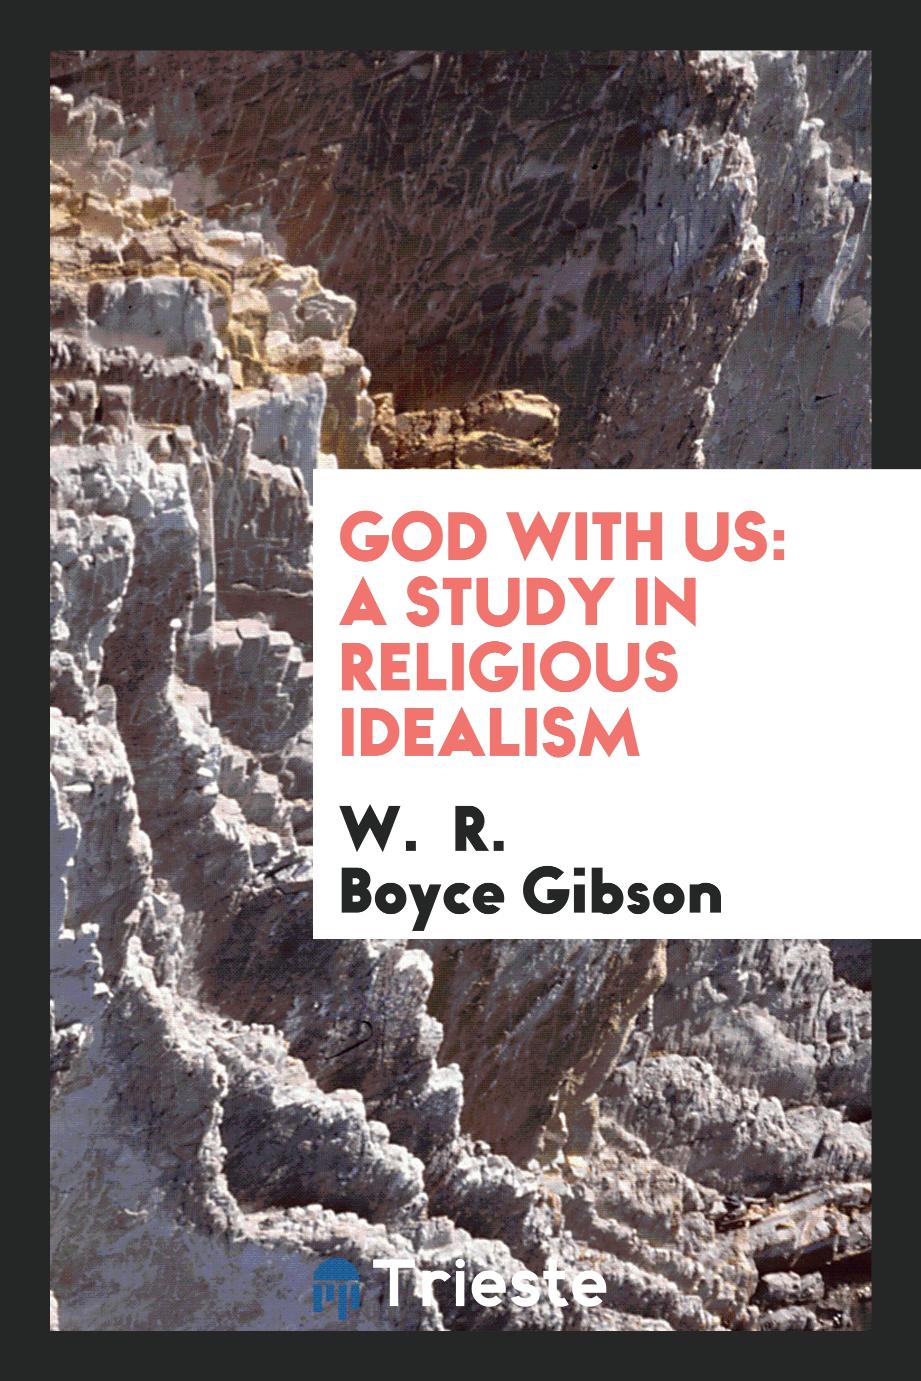 God with us: a study in religious idealism